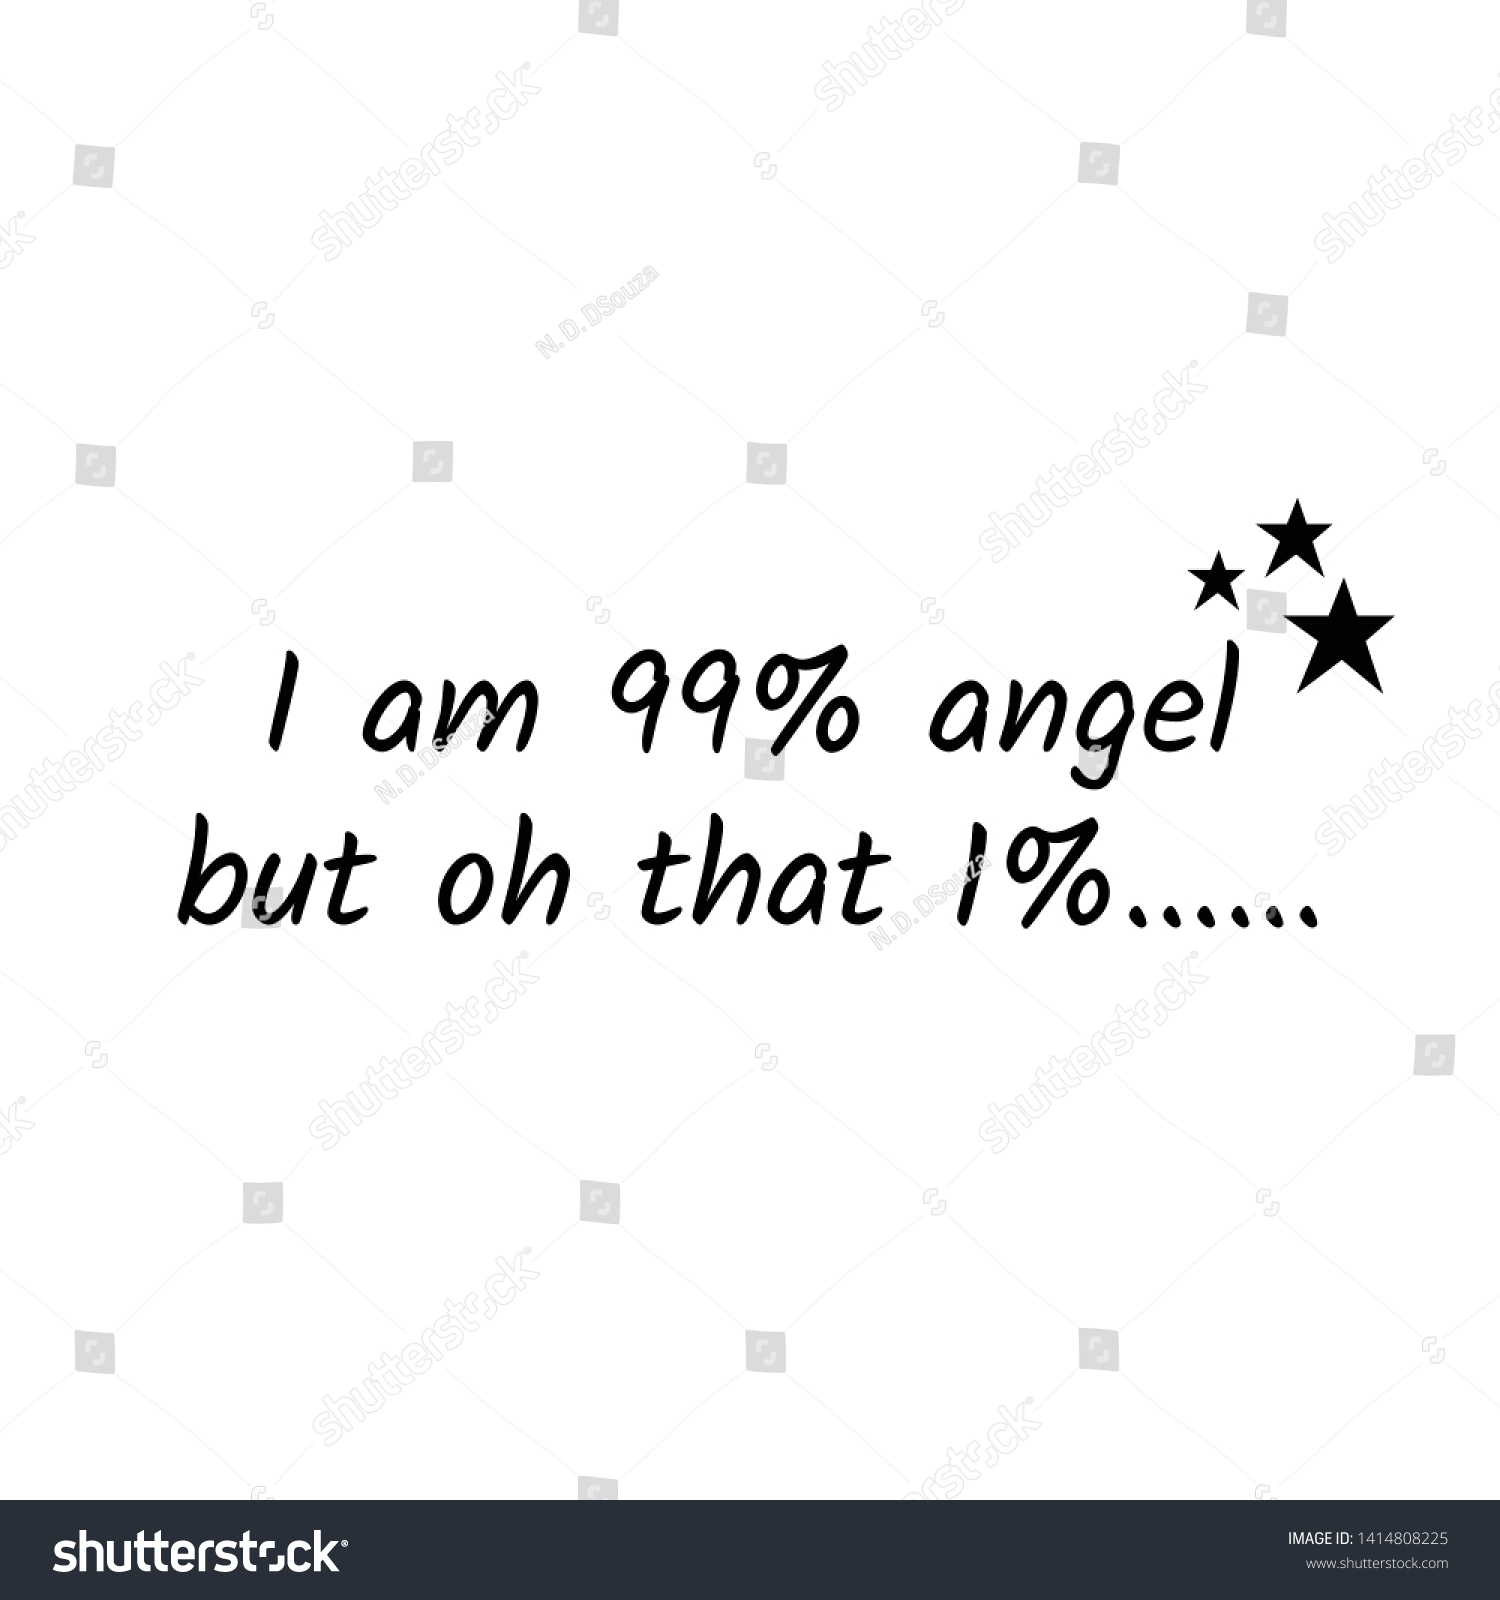 That but oh 99 1 angel Im 99%